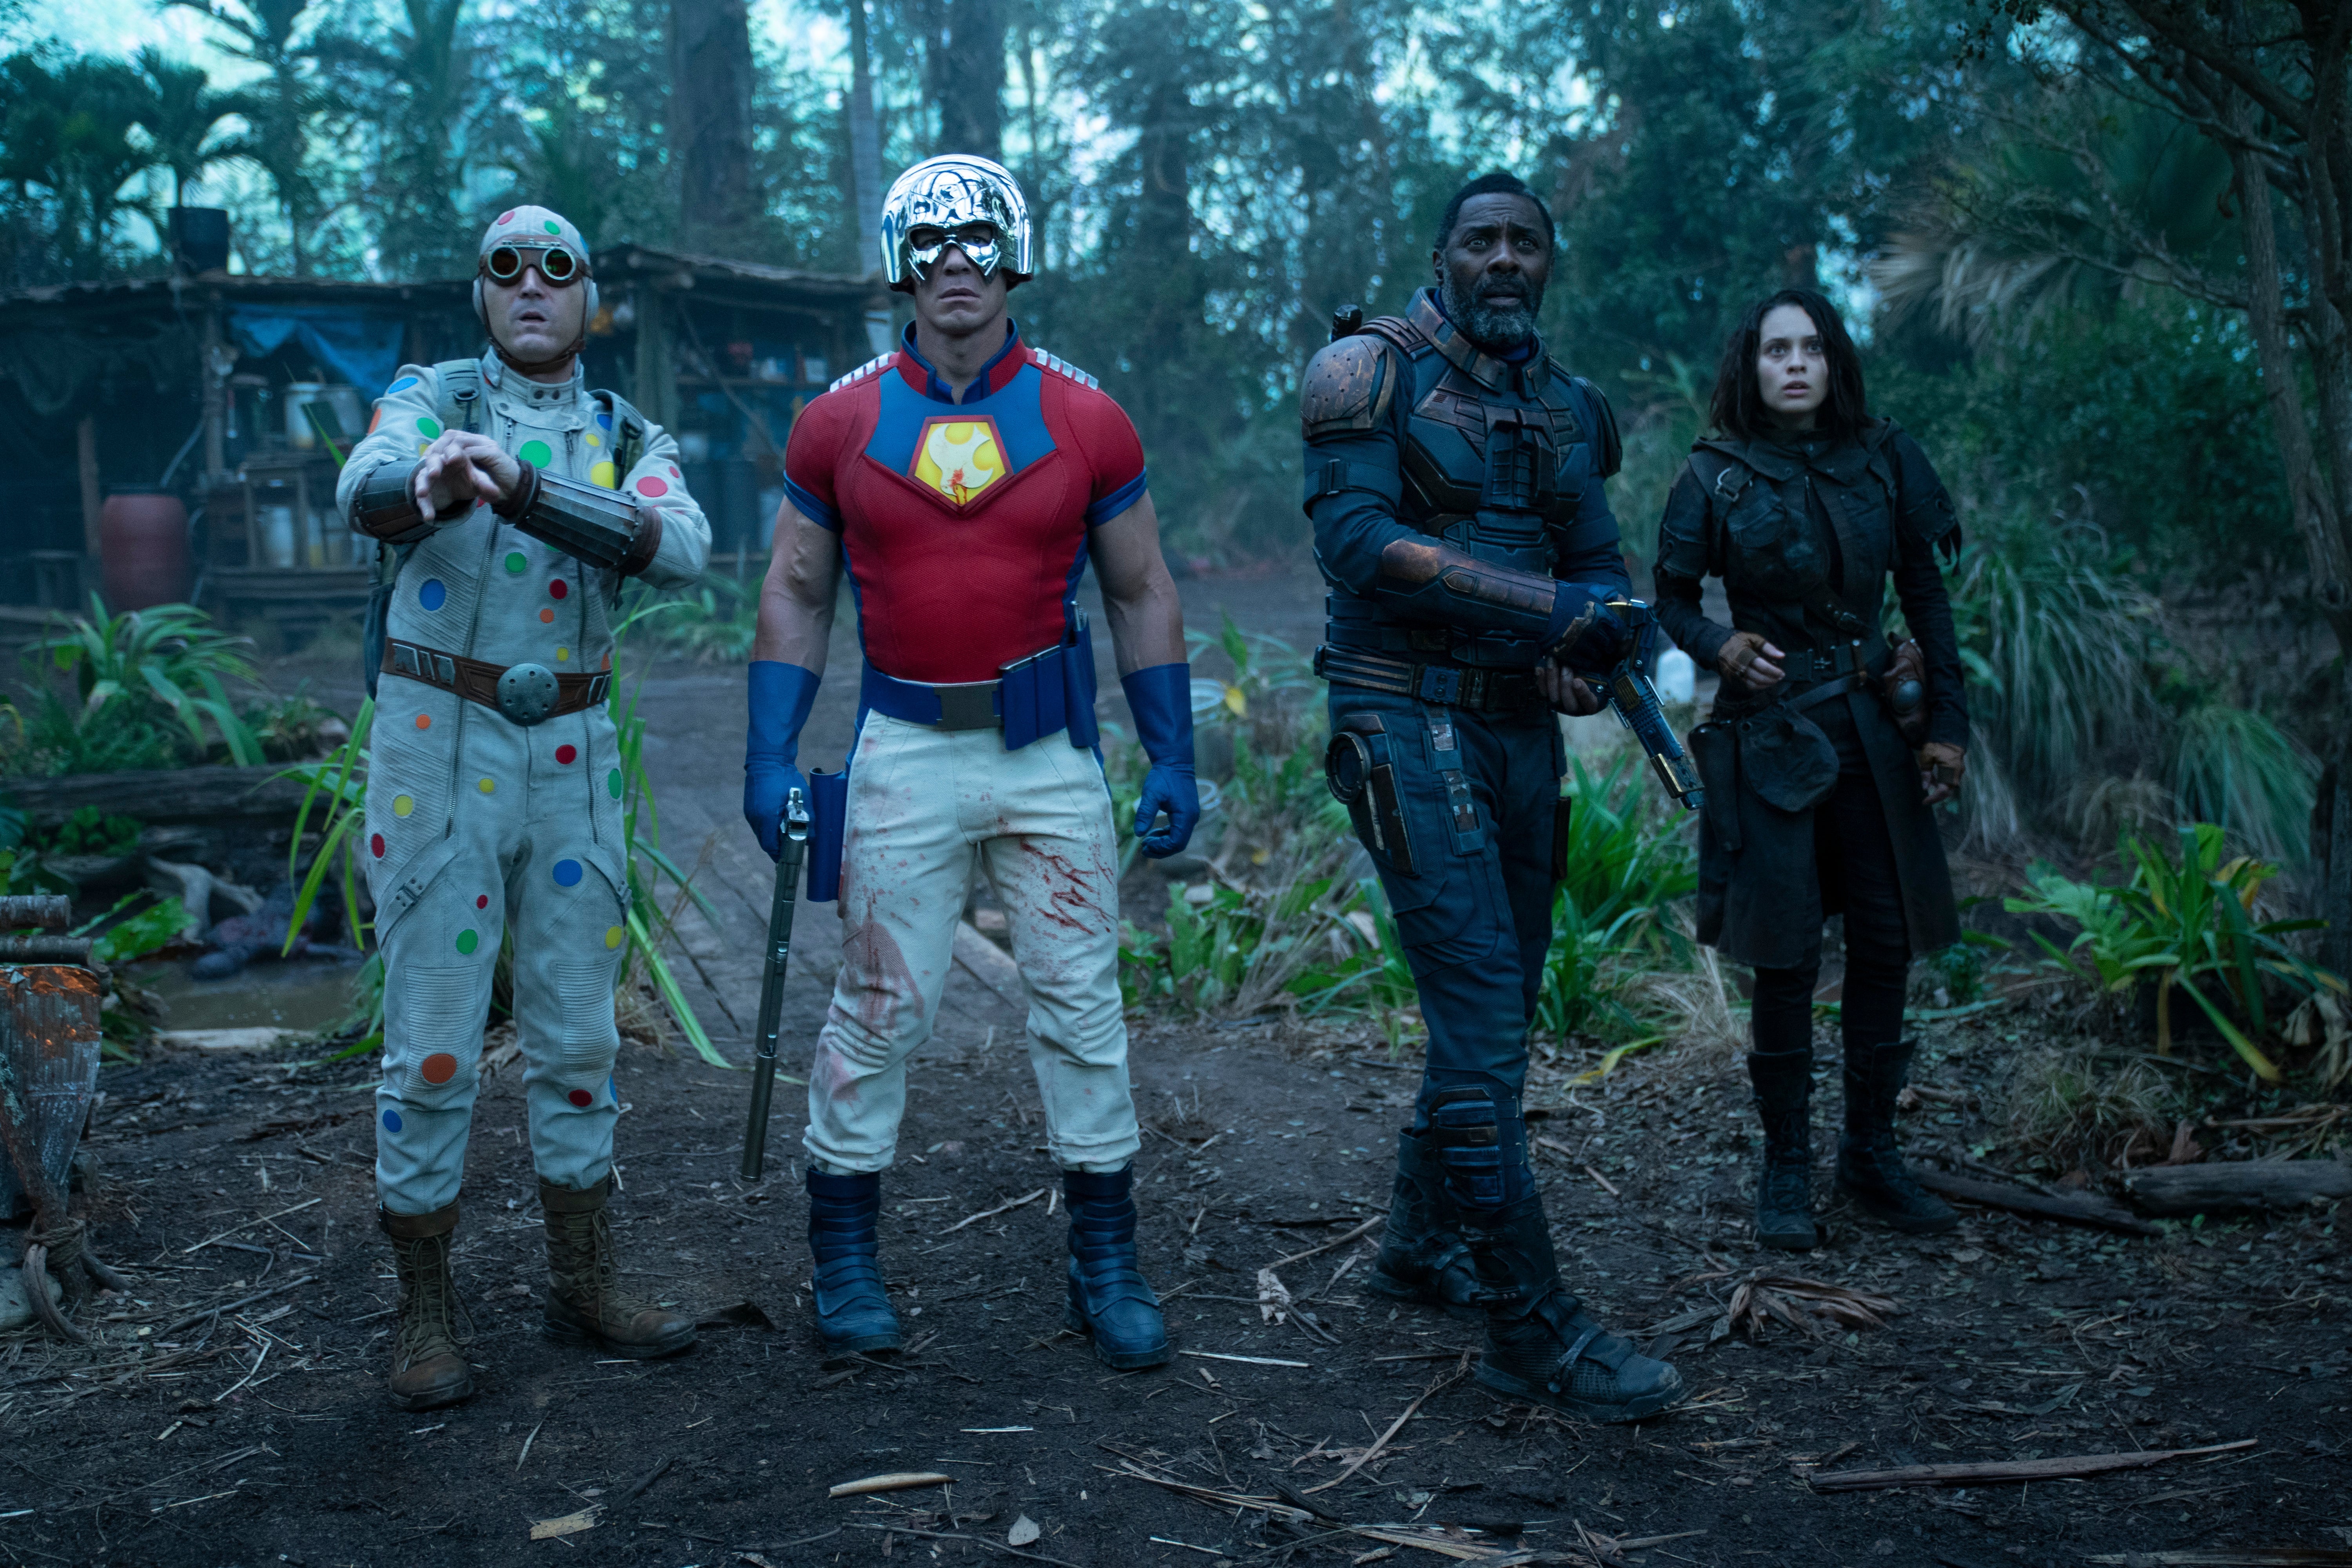 In a forest, a man wearing a crudely made polka dot-covered jumpsuit, a man in a bright red shirt and a metal helmet, and a man and woman both wearing all black. 